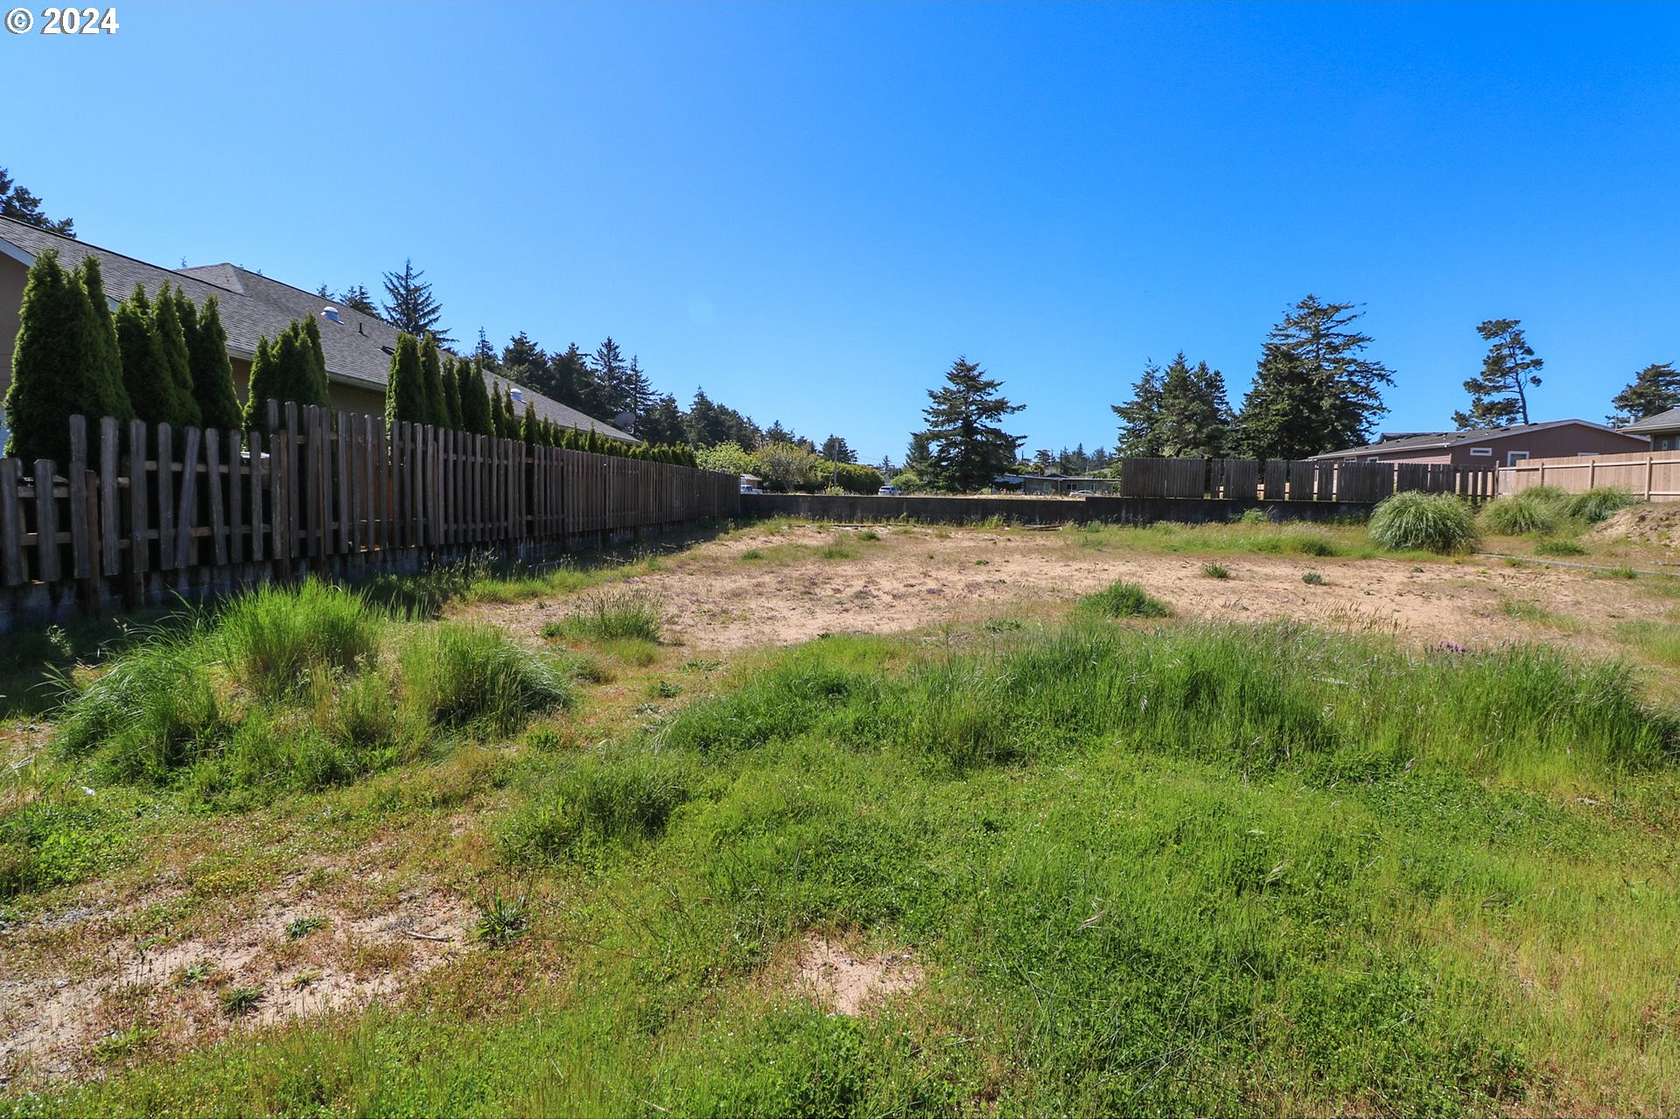 0.17 Acres of Residential Land for Sale in Coos Bay, Oregon